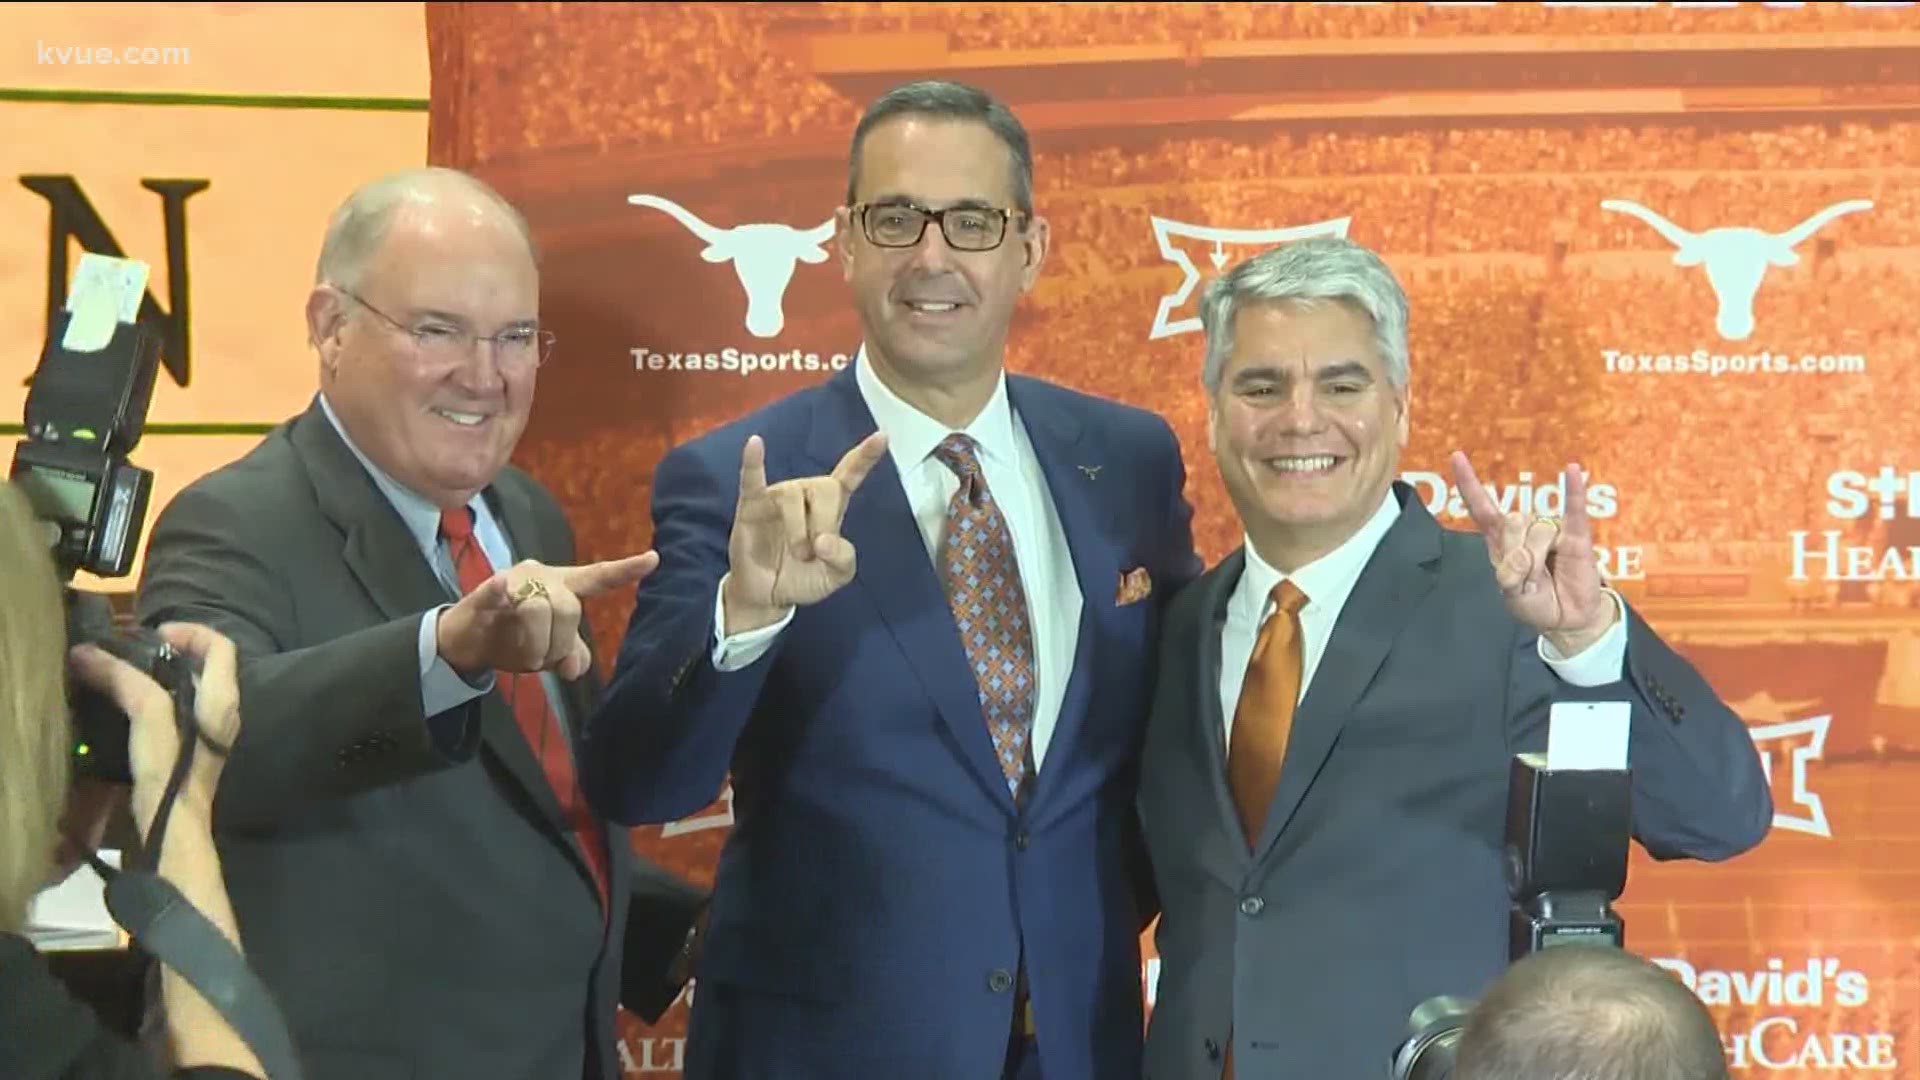 Athletics Director Chris Del Conte gave an update on the UT football players who were presumed positive for COVID-19.